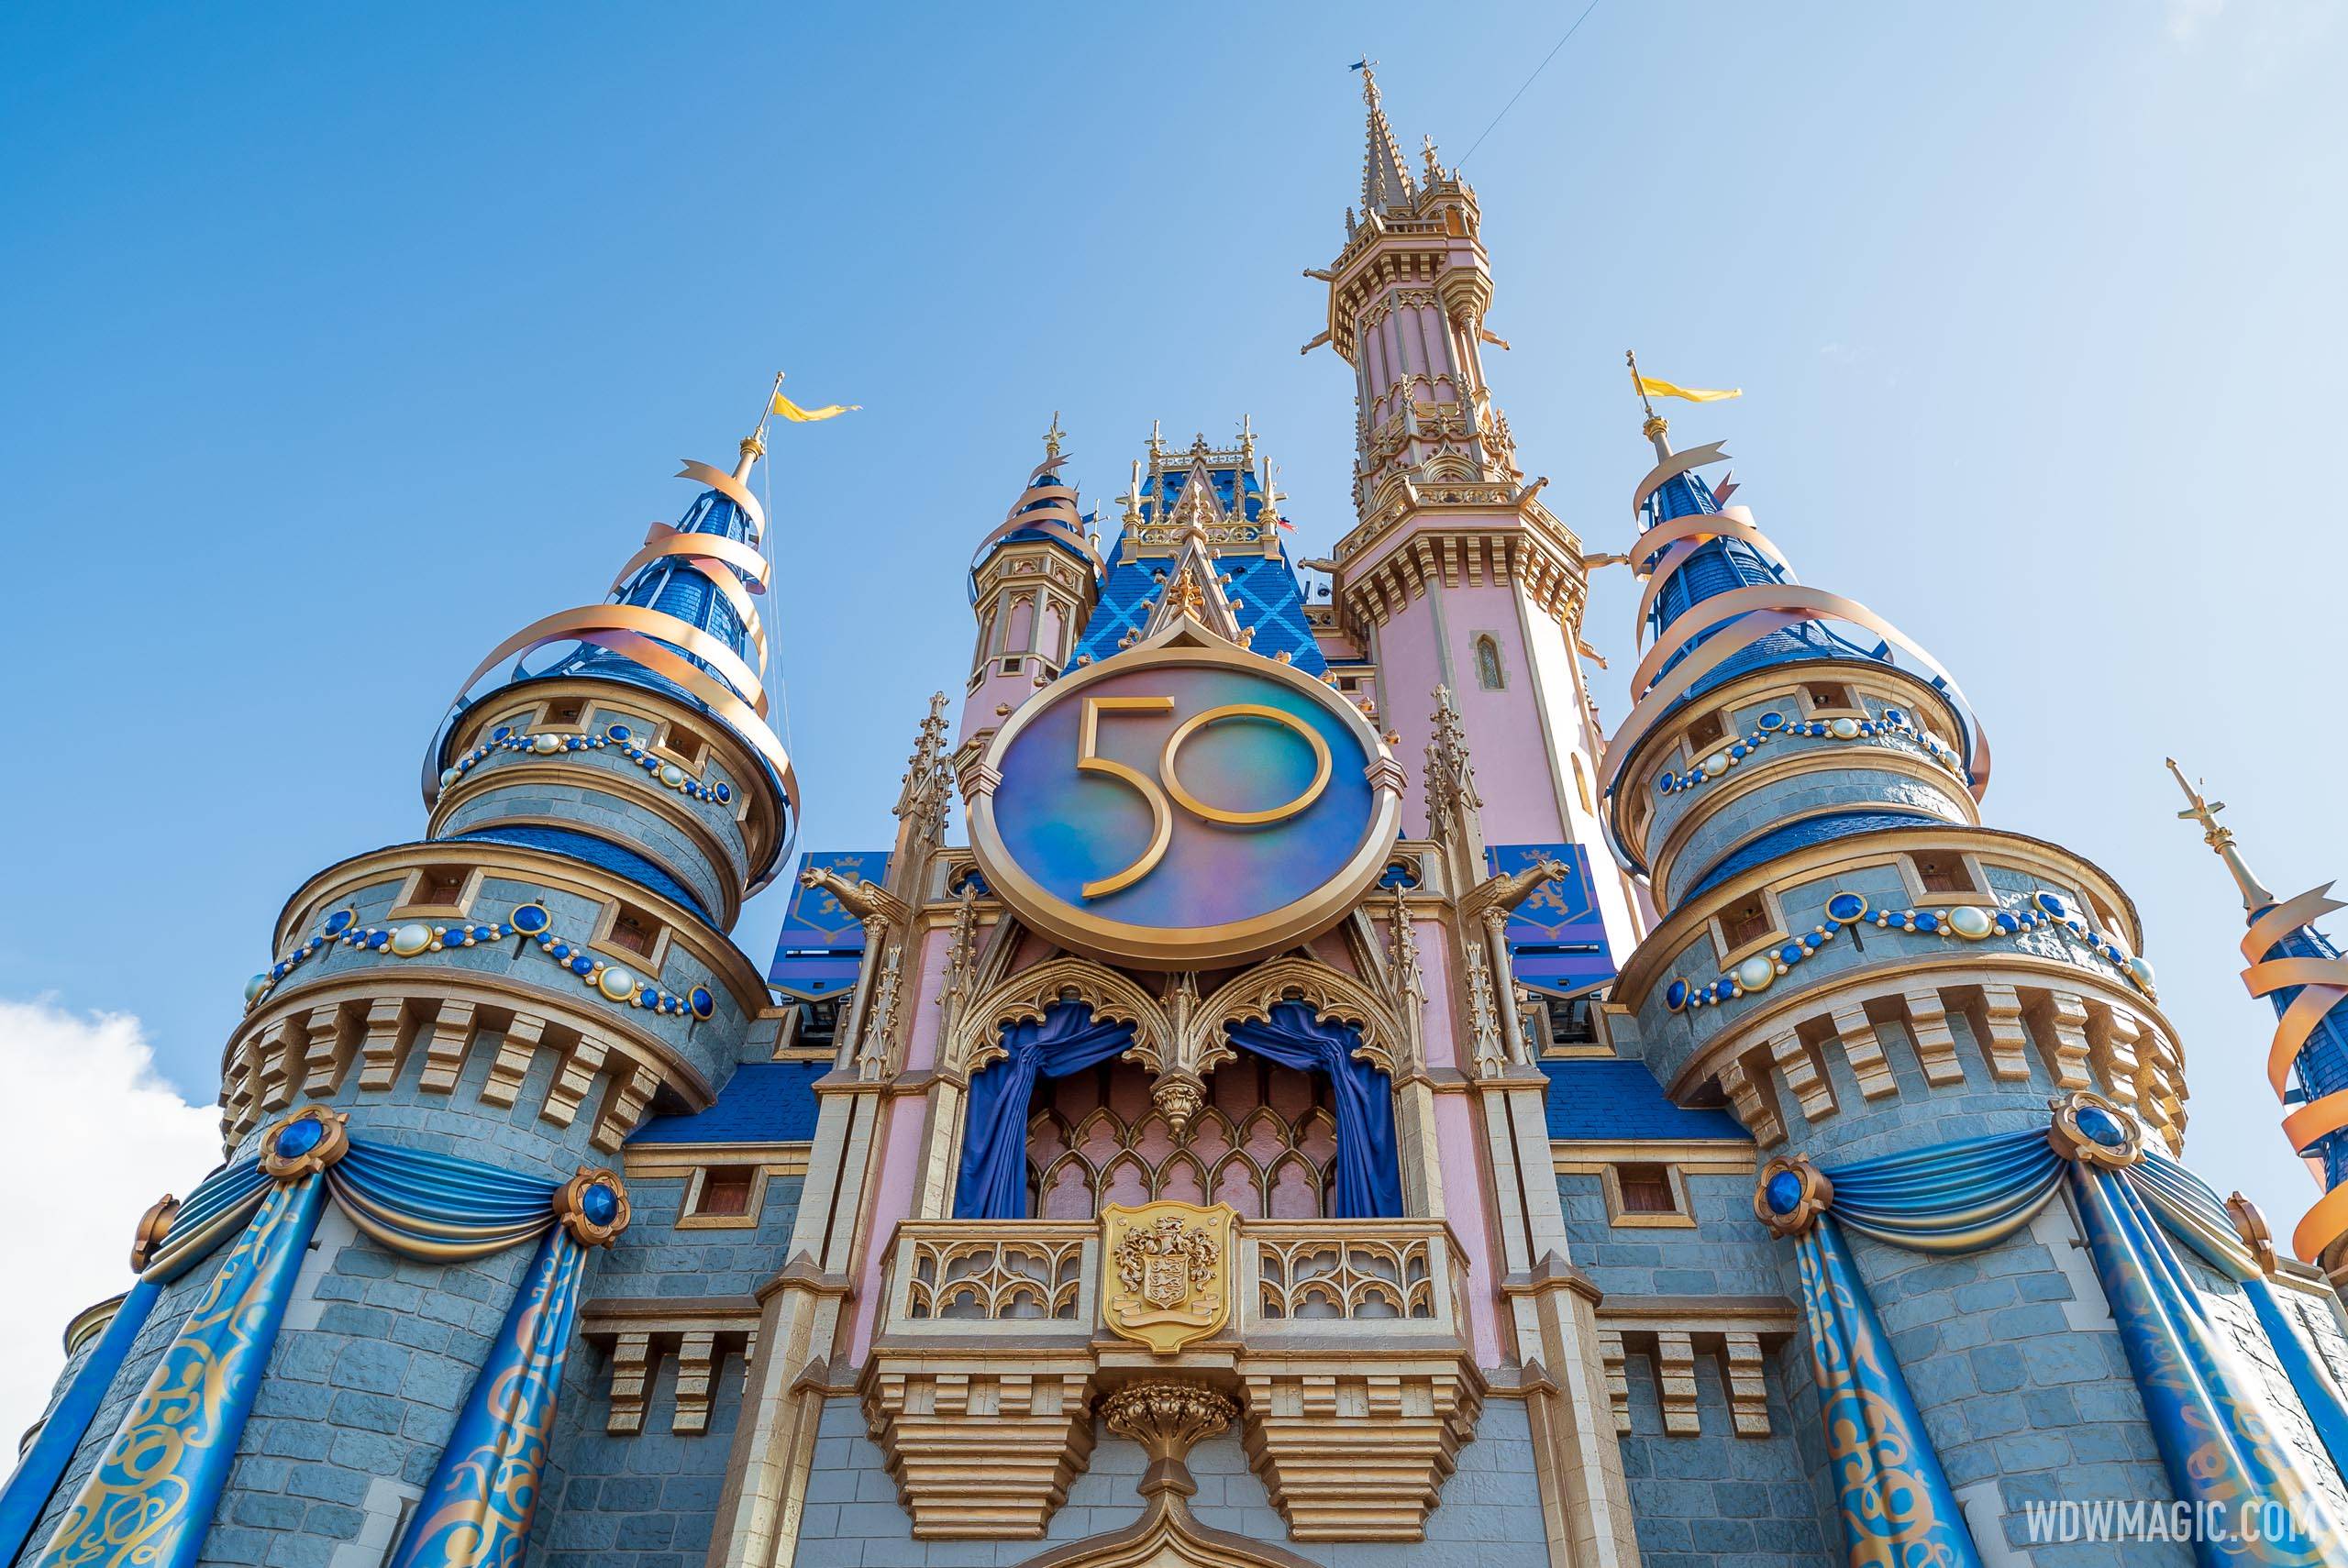 Walt Disney World continues to face a labor shortage as it prepares to celebrate 50 years